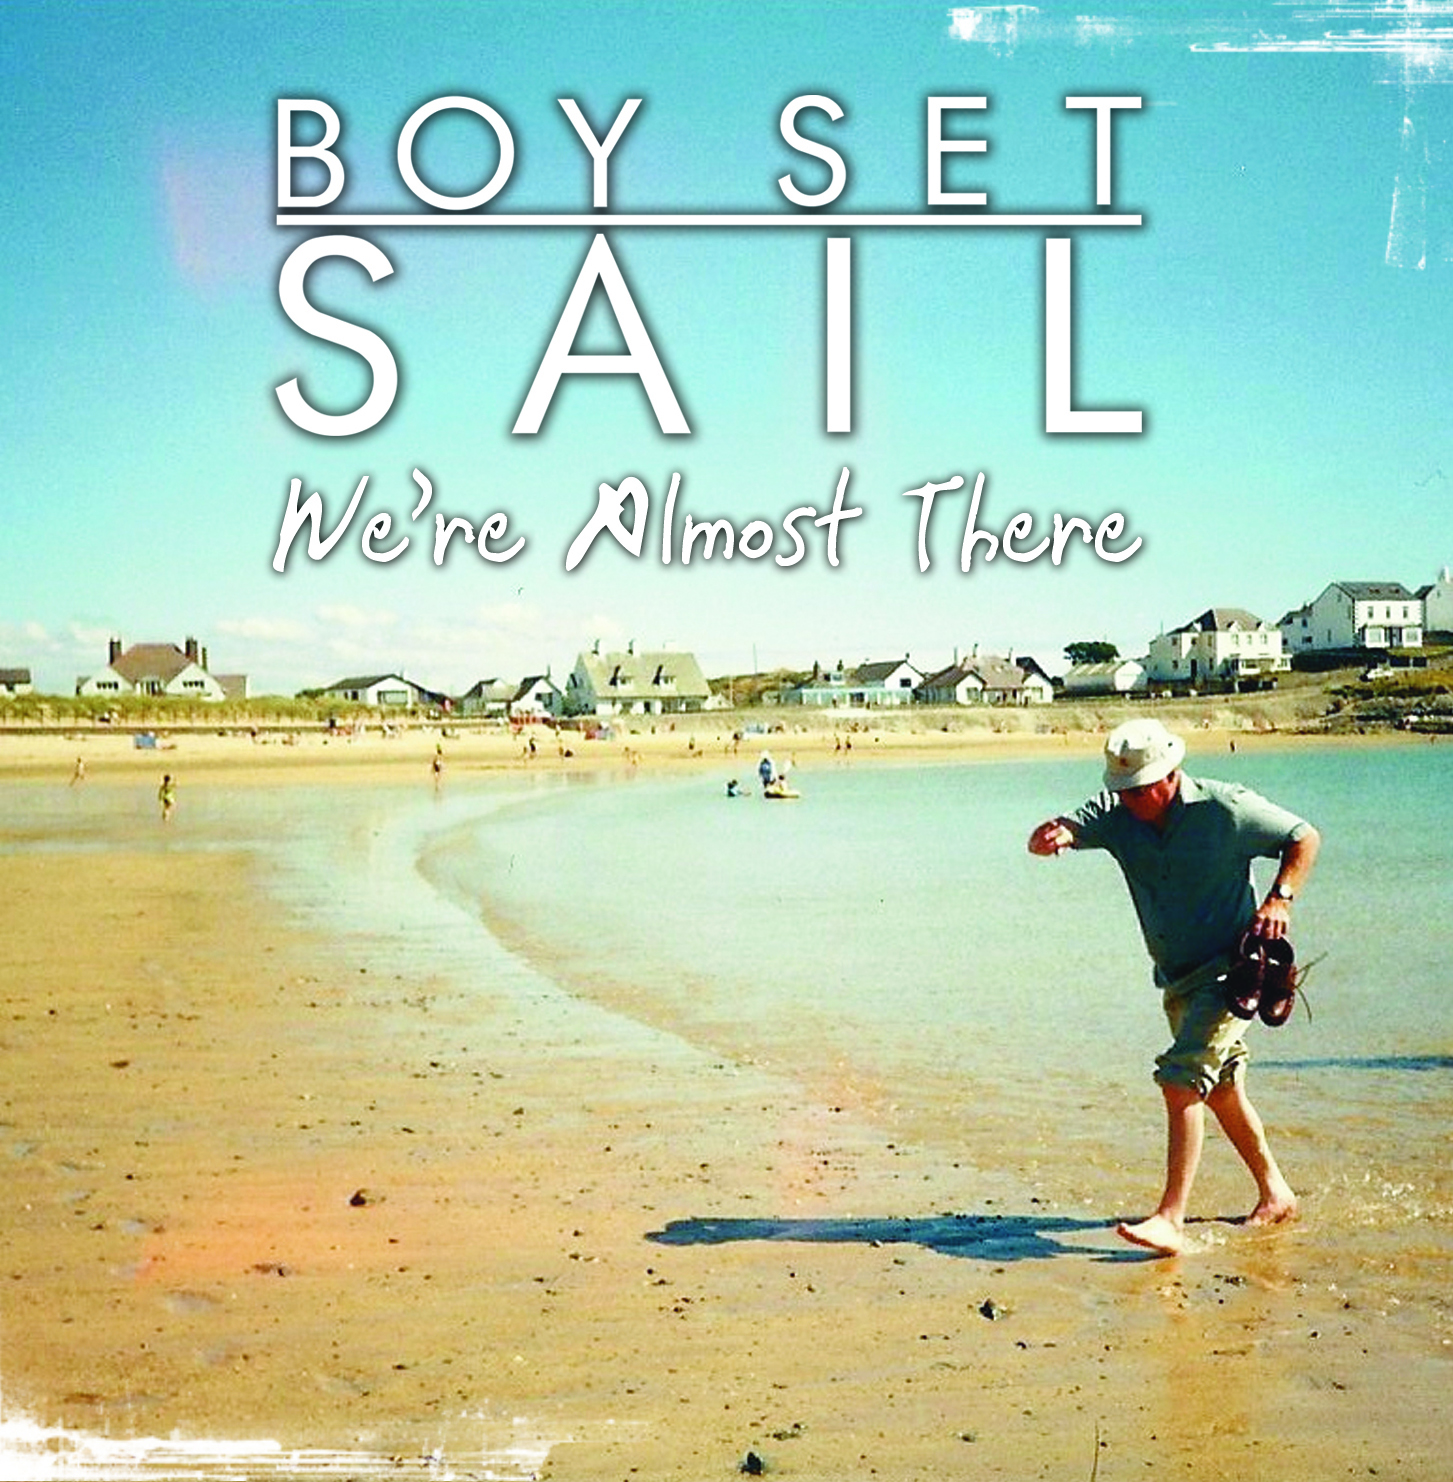 Boy Set Sail debut E.P available to pre-order now!